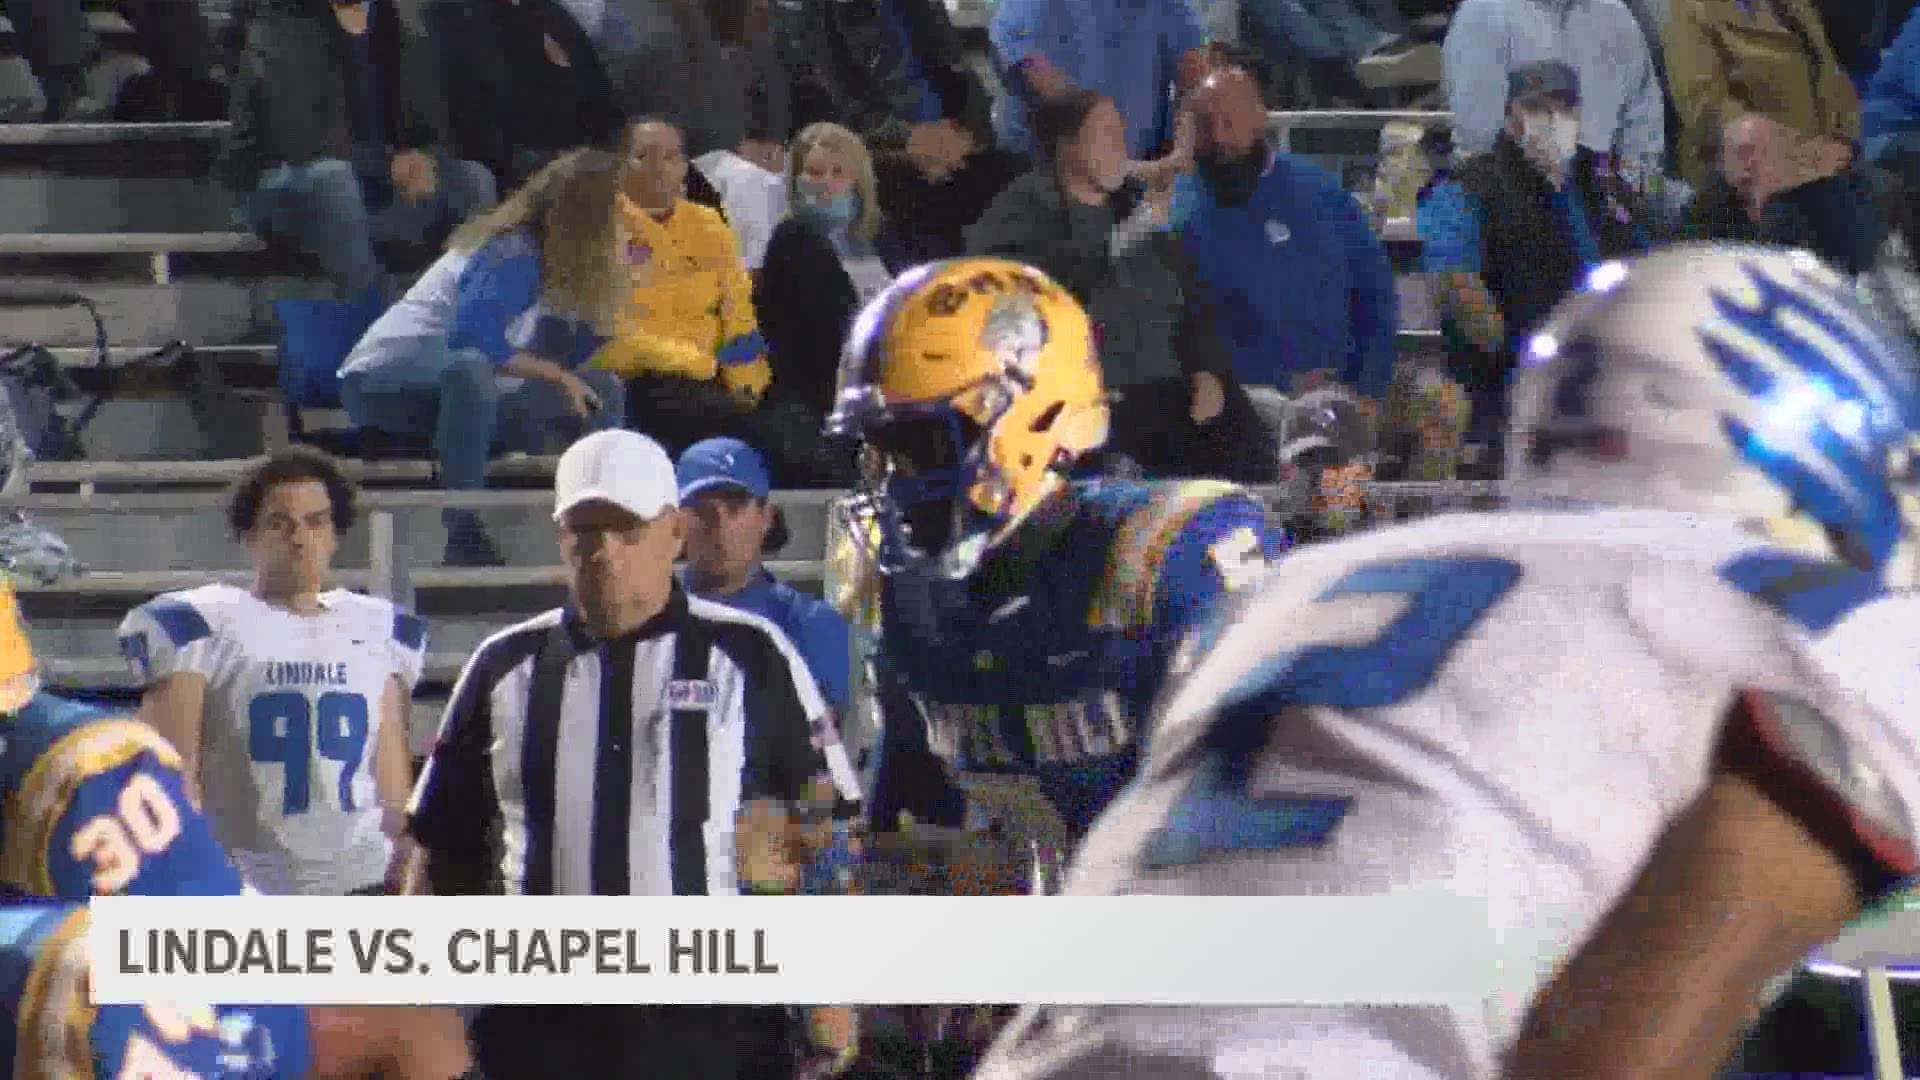 Lindale dominated Chapel Hill by a score of 52-6.